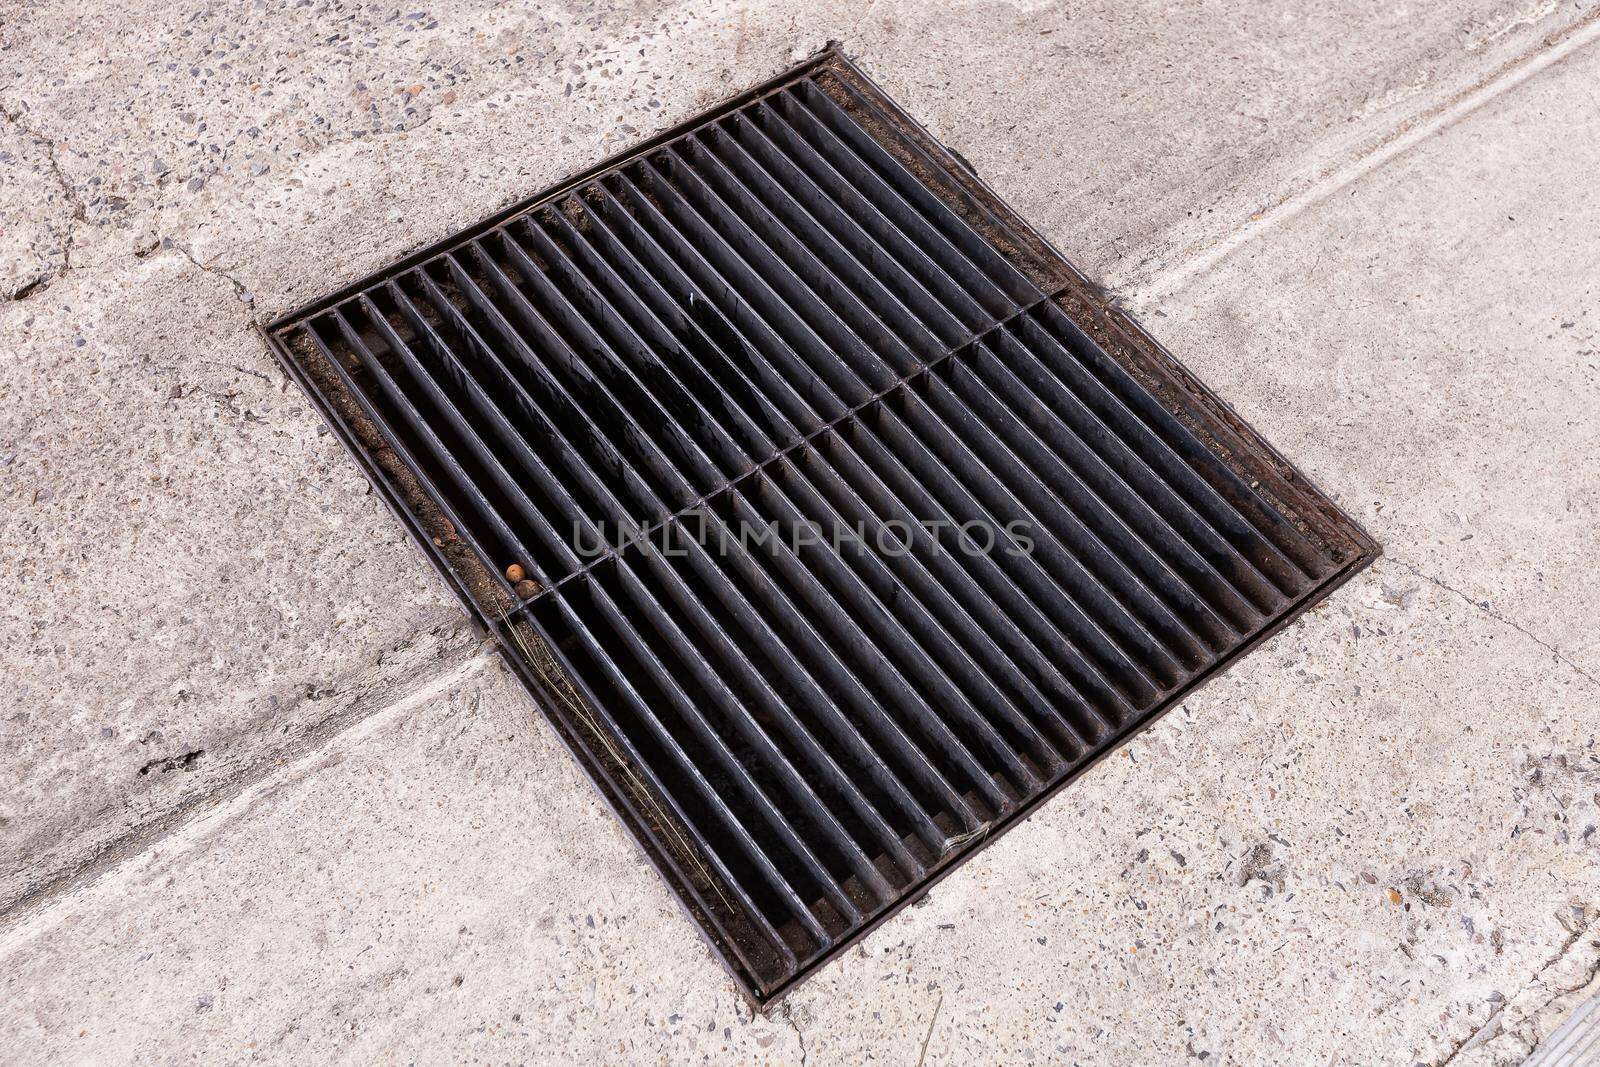 Old steel drainage grating on road by smuay